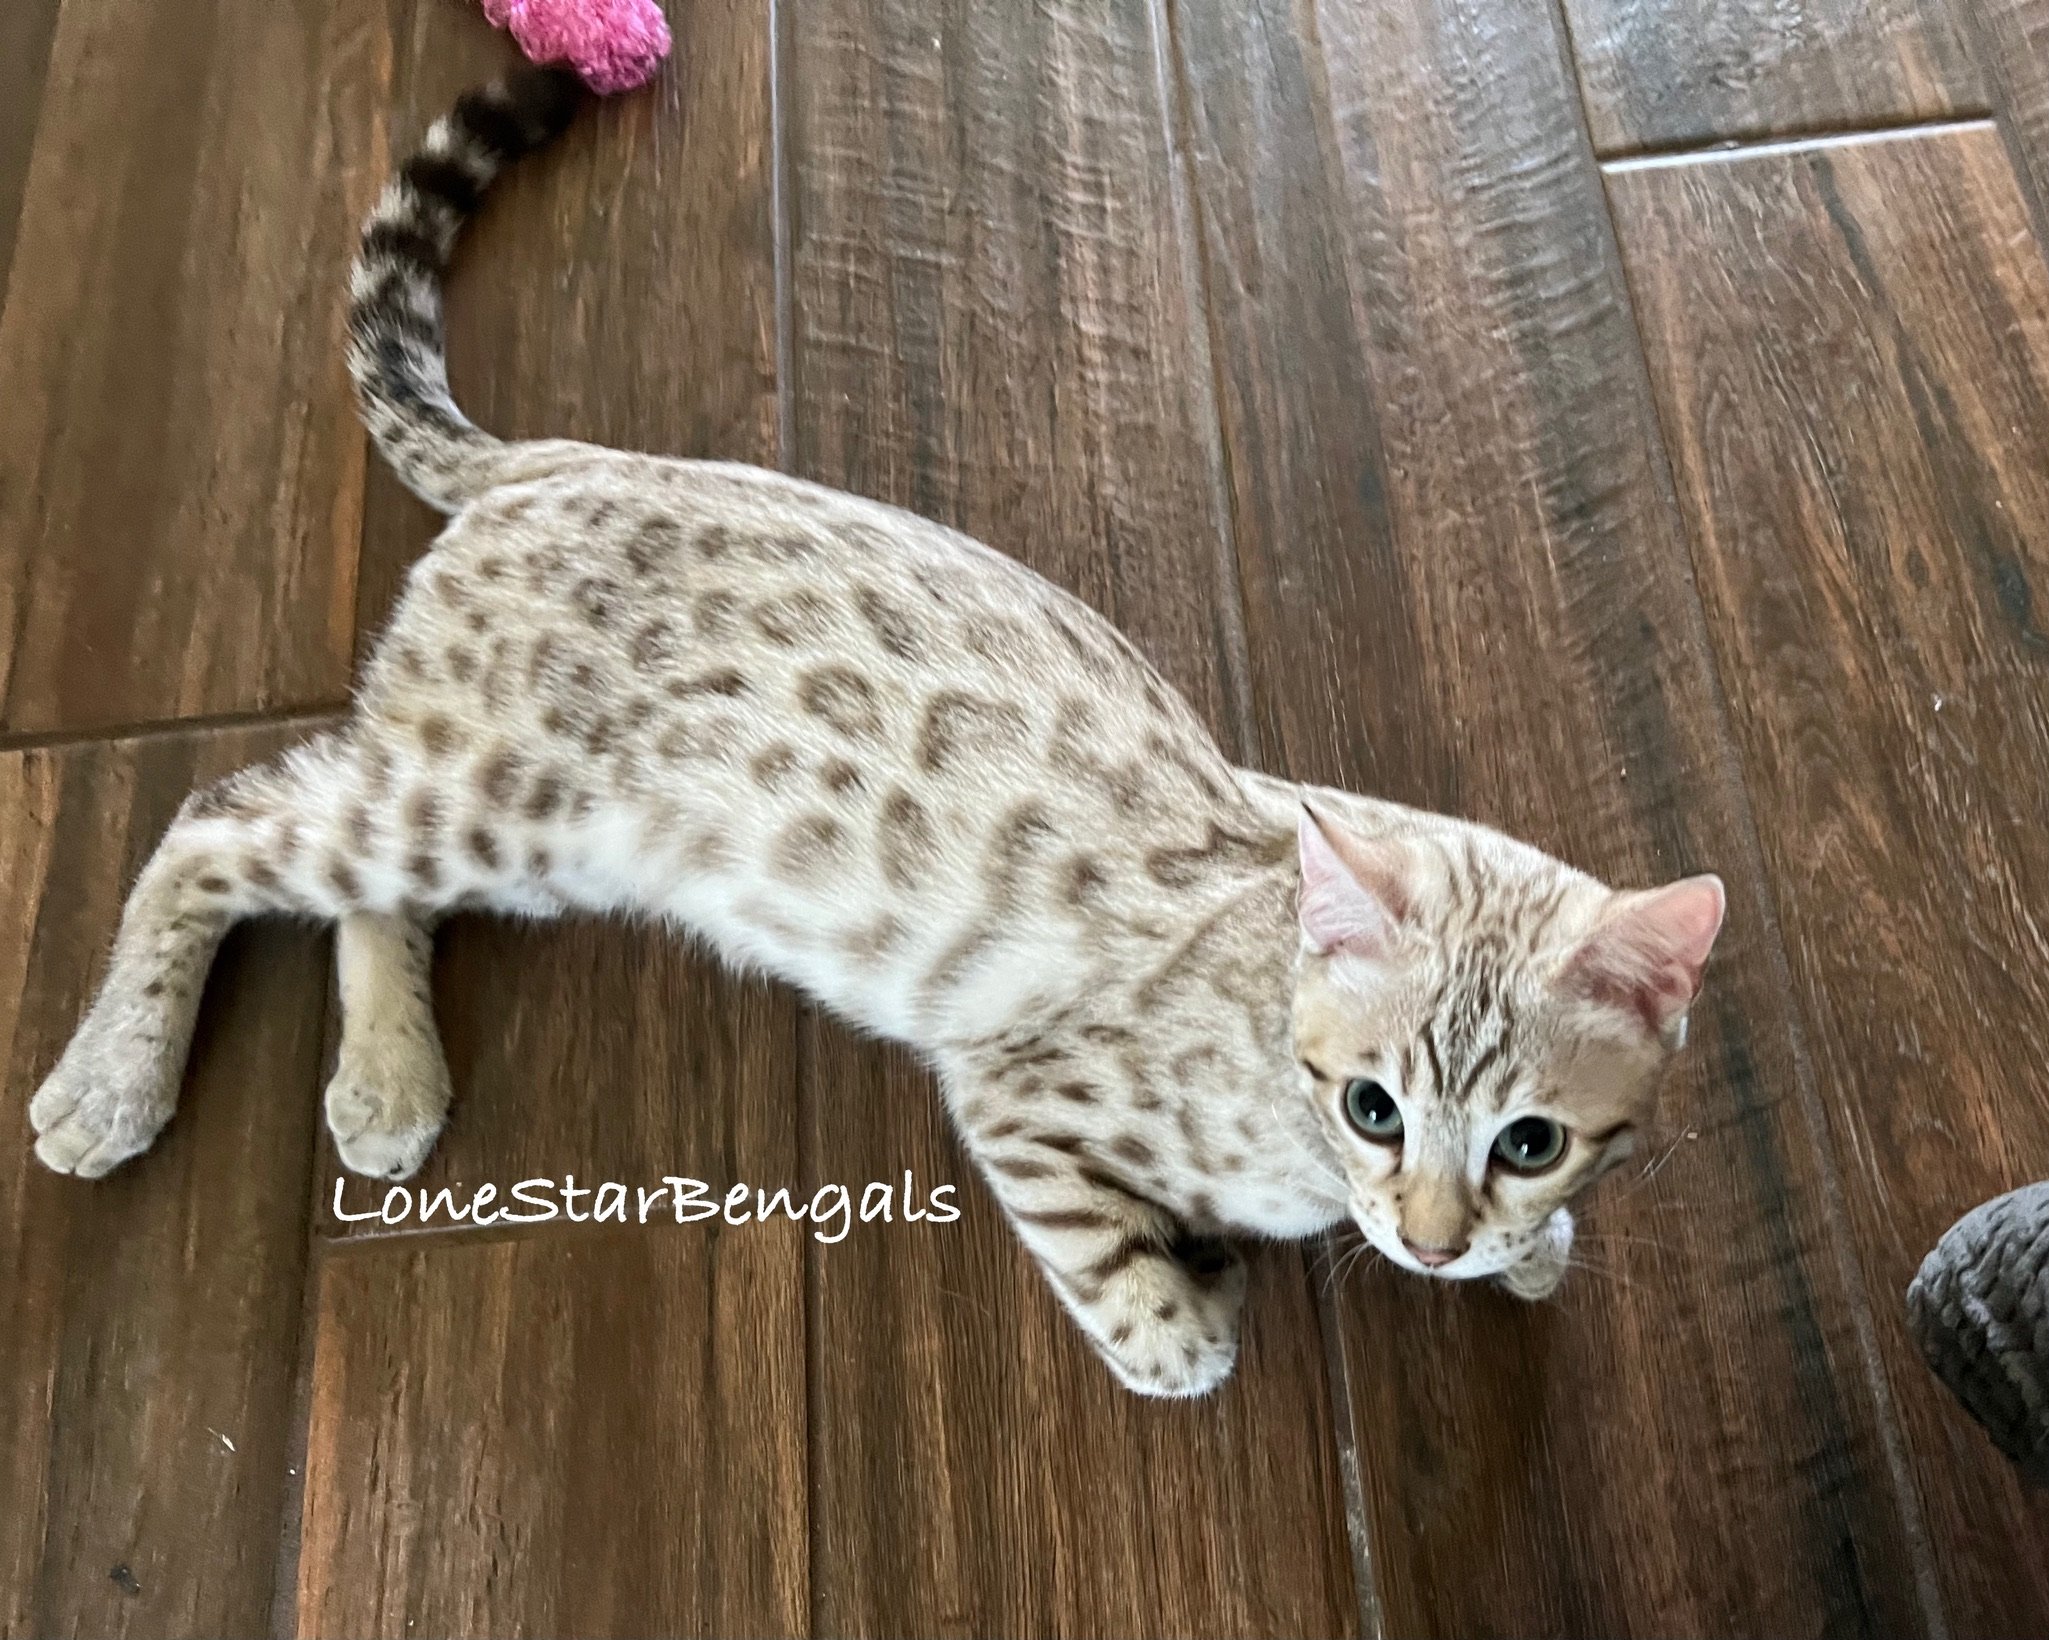 A Bengal cat lounging on a superior quality wooden floor.